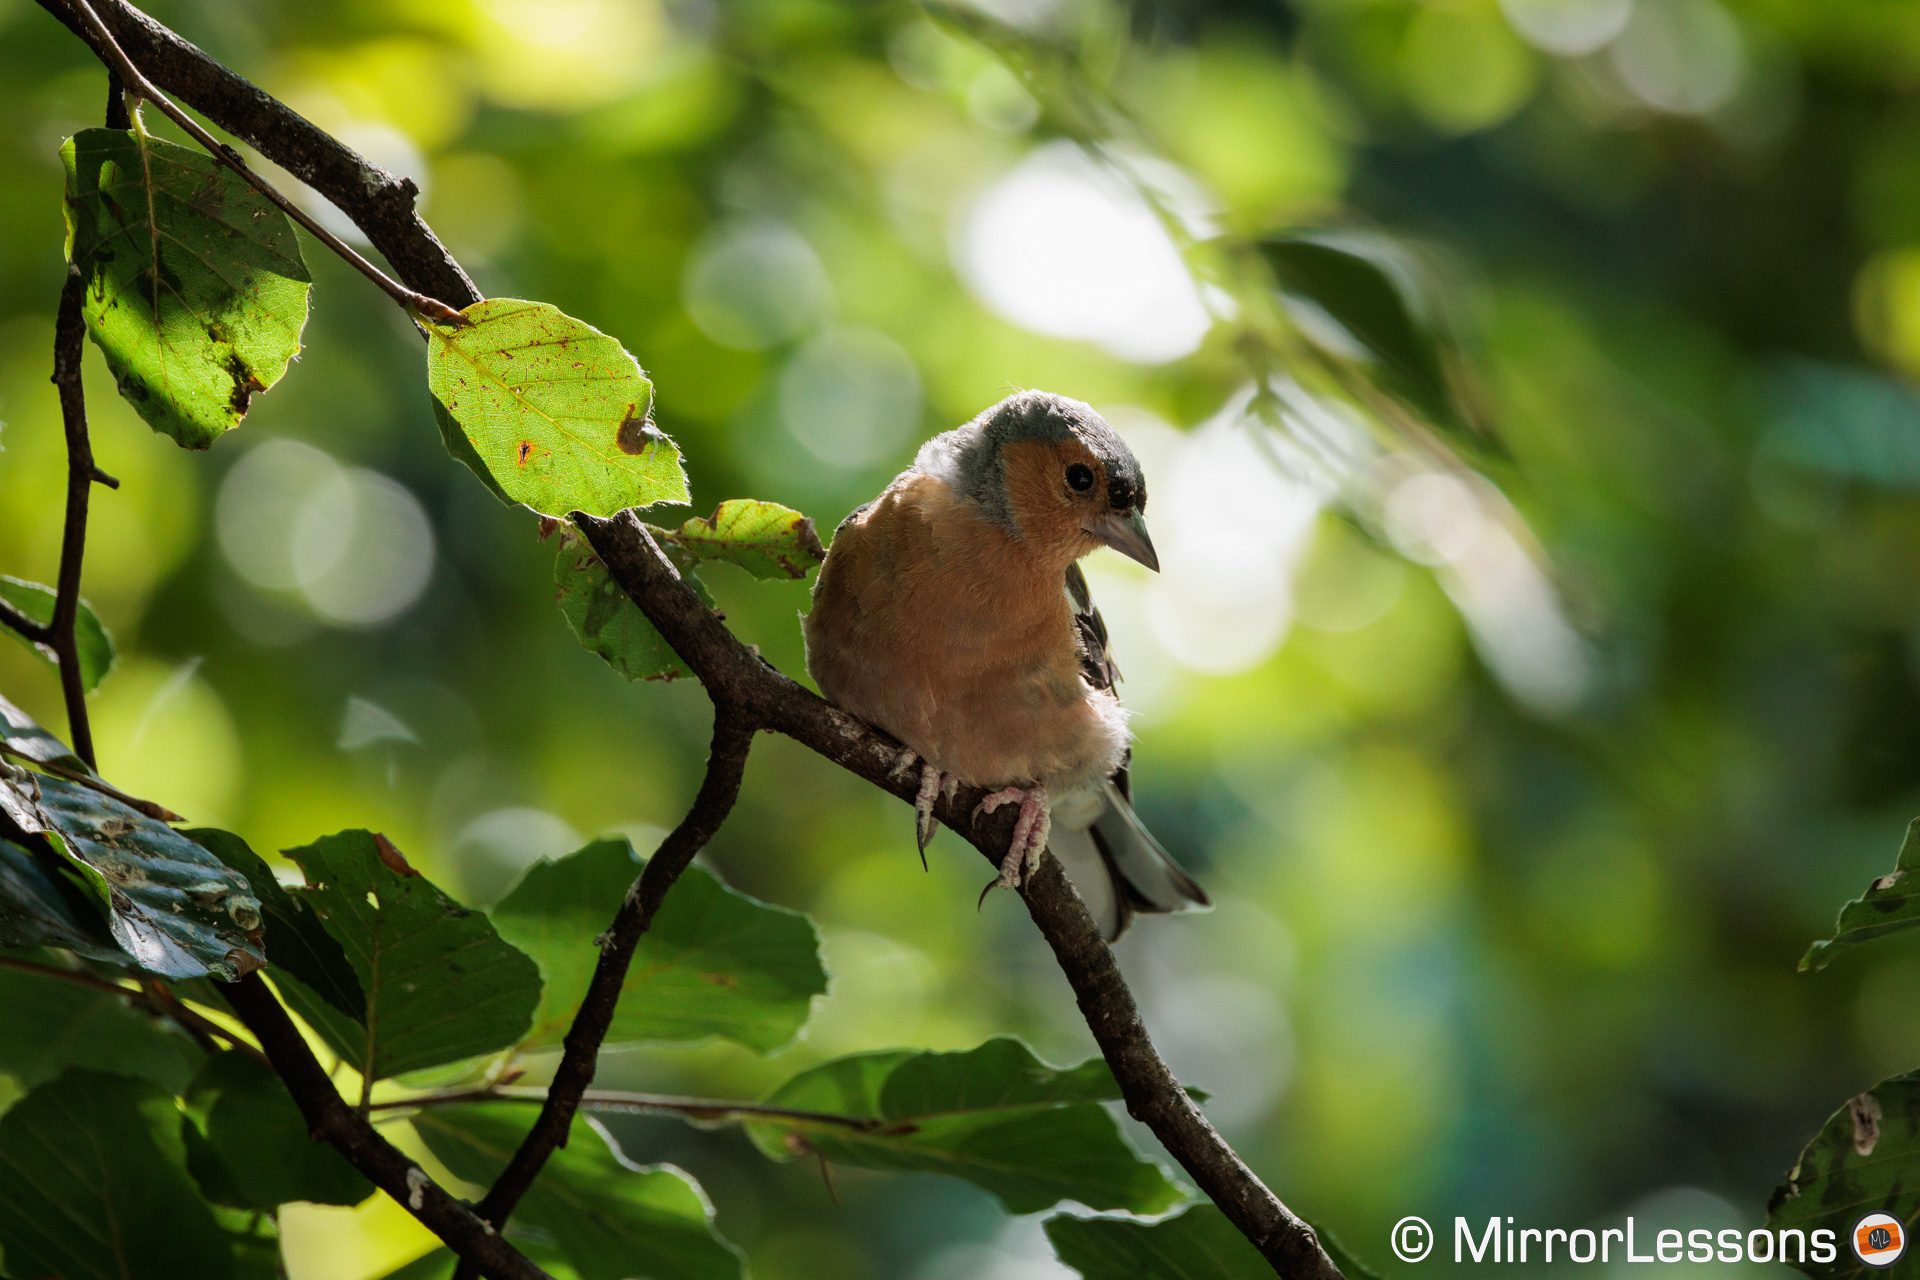 Chaffinch on a branch, surrounded by leaves, backlight shot